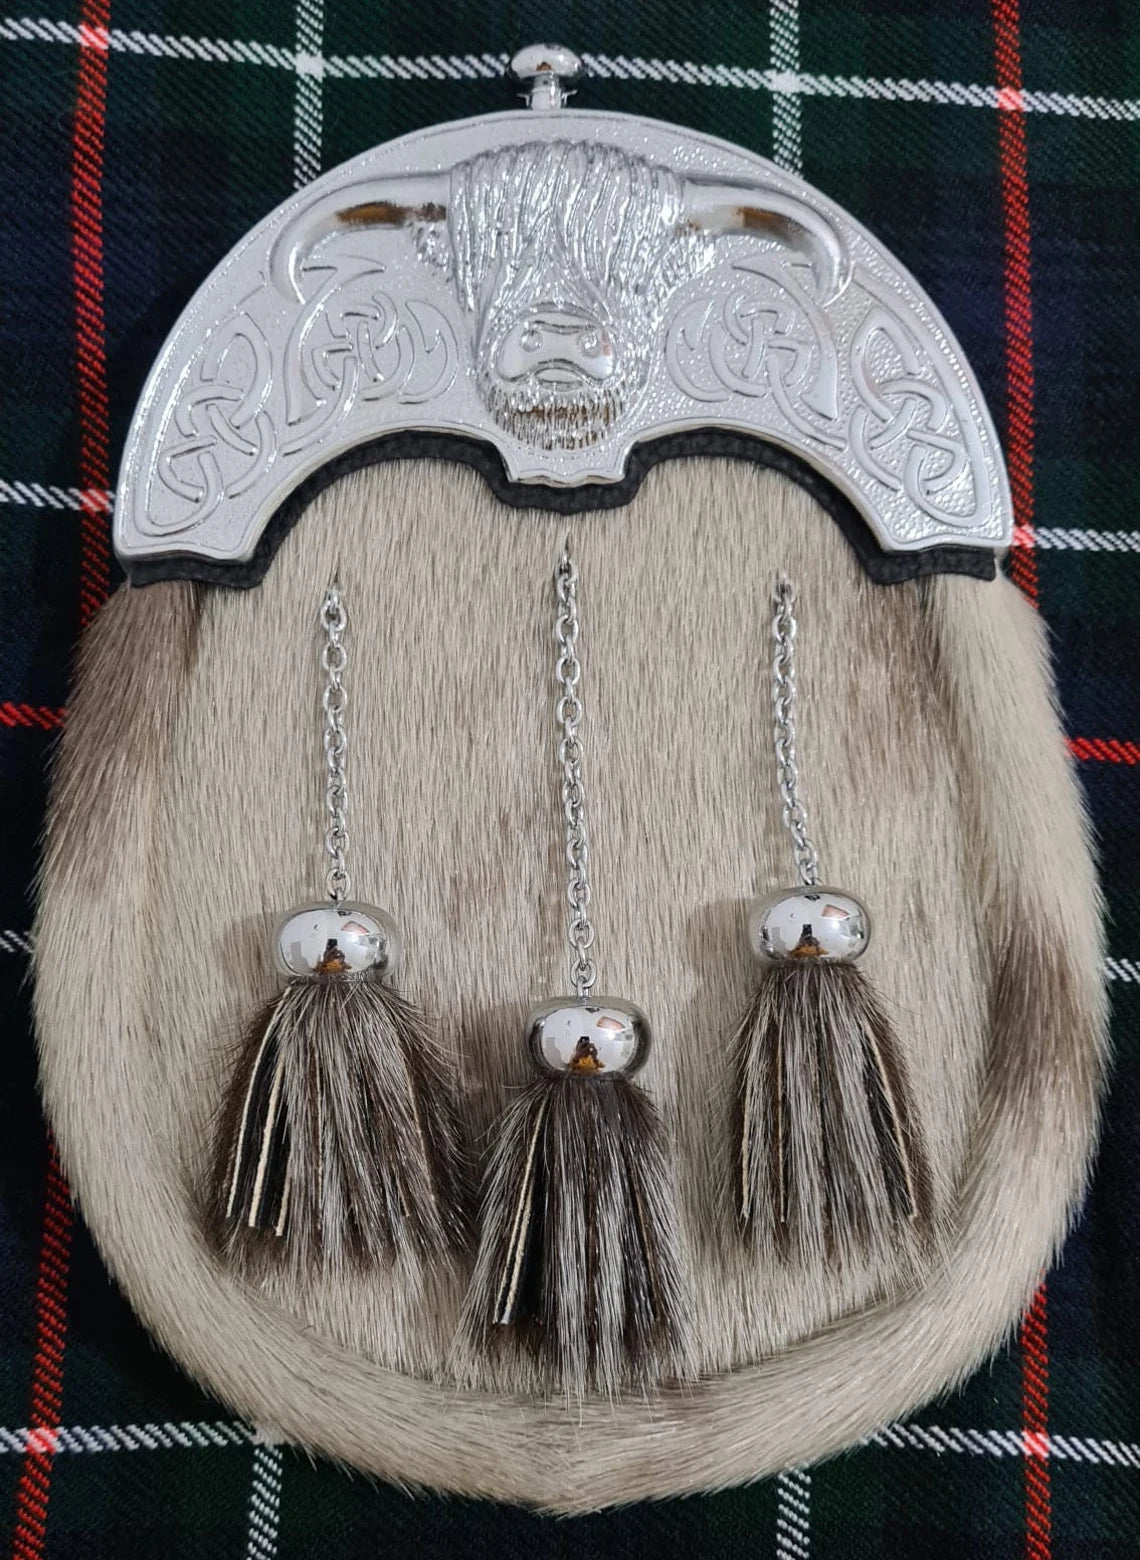 Scottish Full-Dress Real Leather Sporran Handcrafted, Celtic Stag Cantle With 3 tassels.